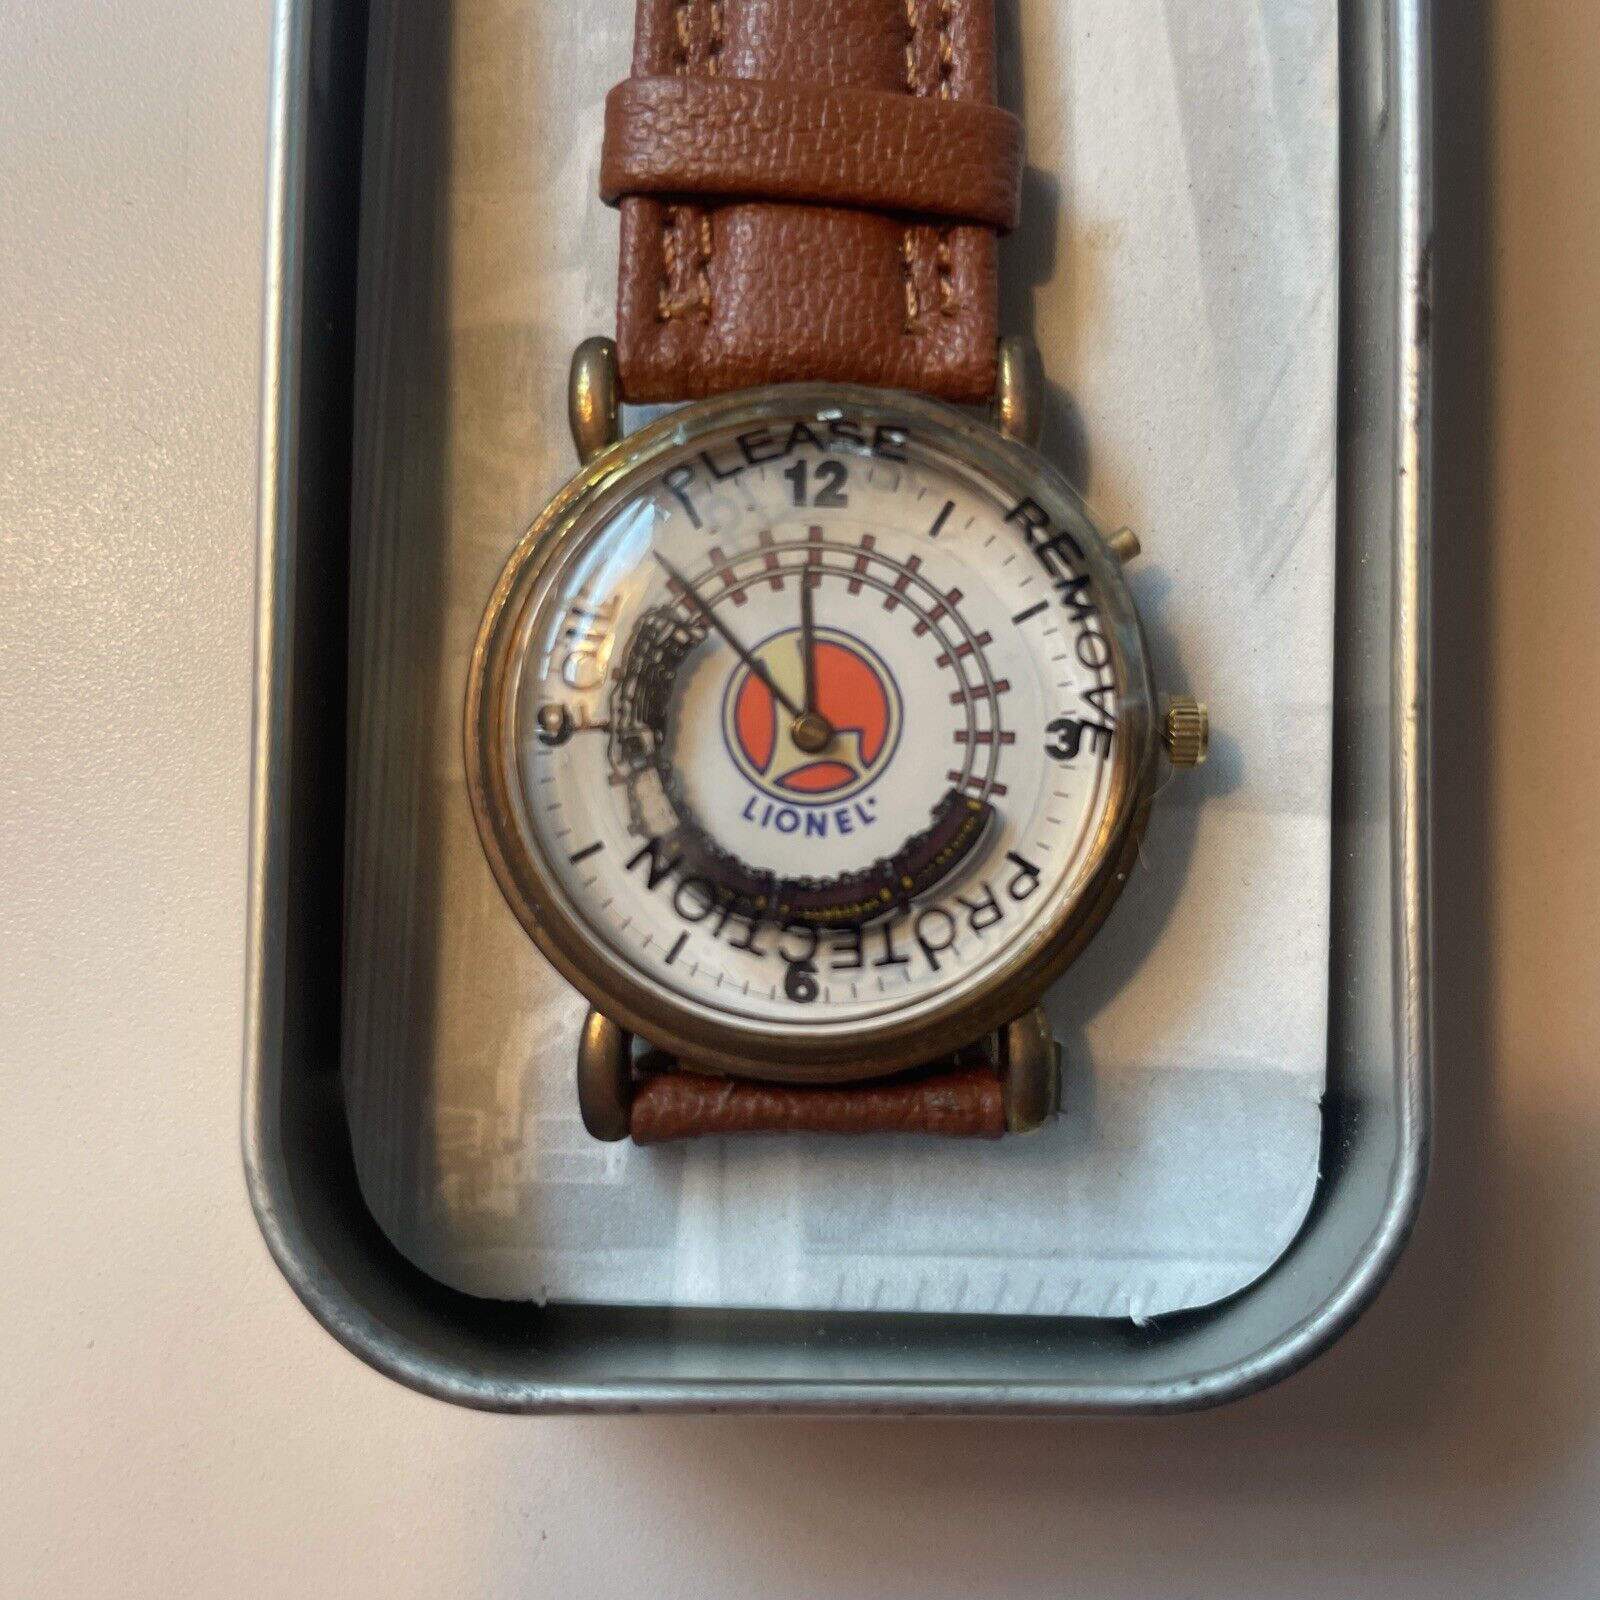 TeleBrands Collectors Edition - Lionel Collectible Train Watch NEEDS BATTERY